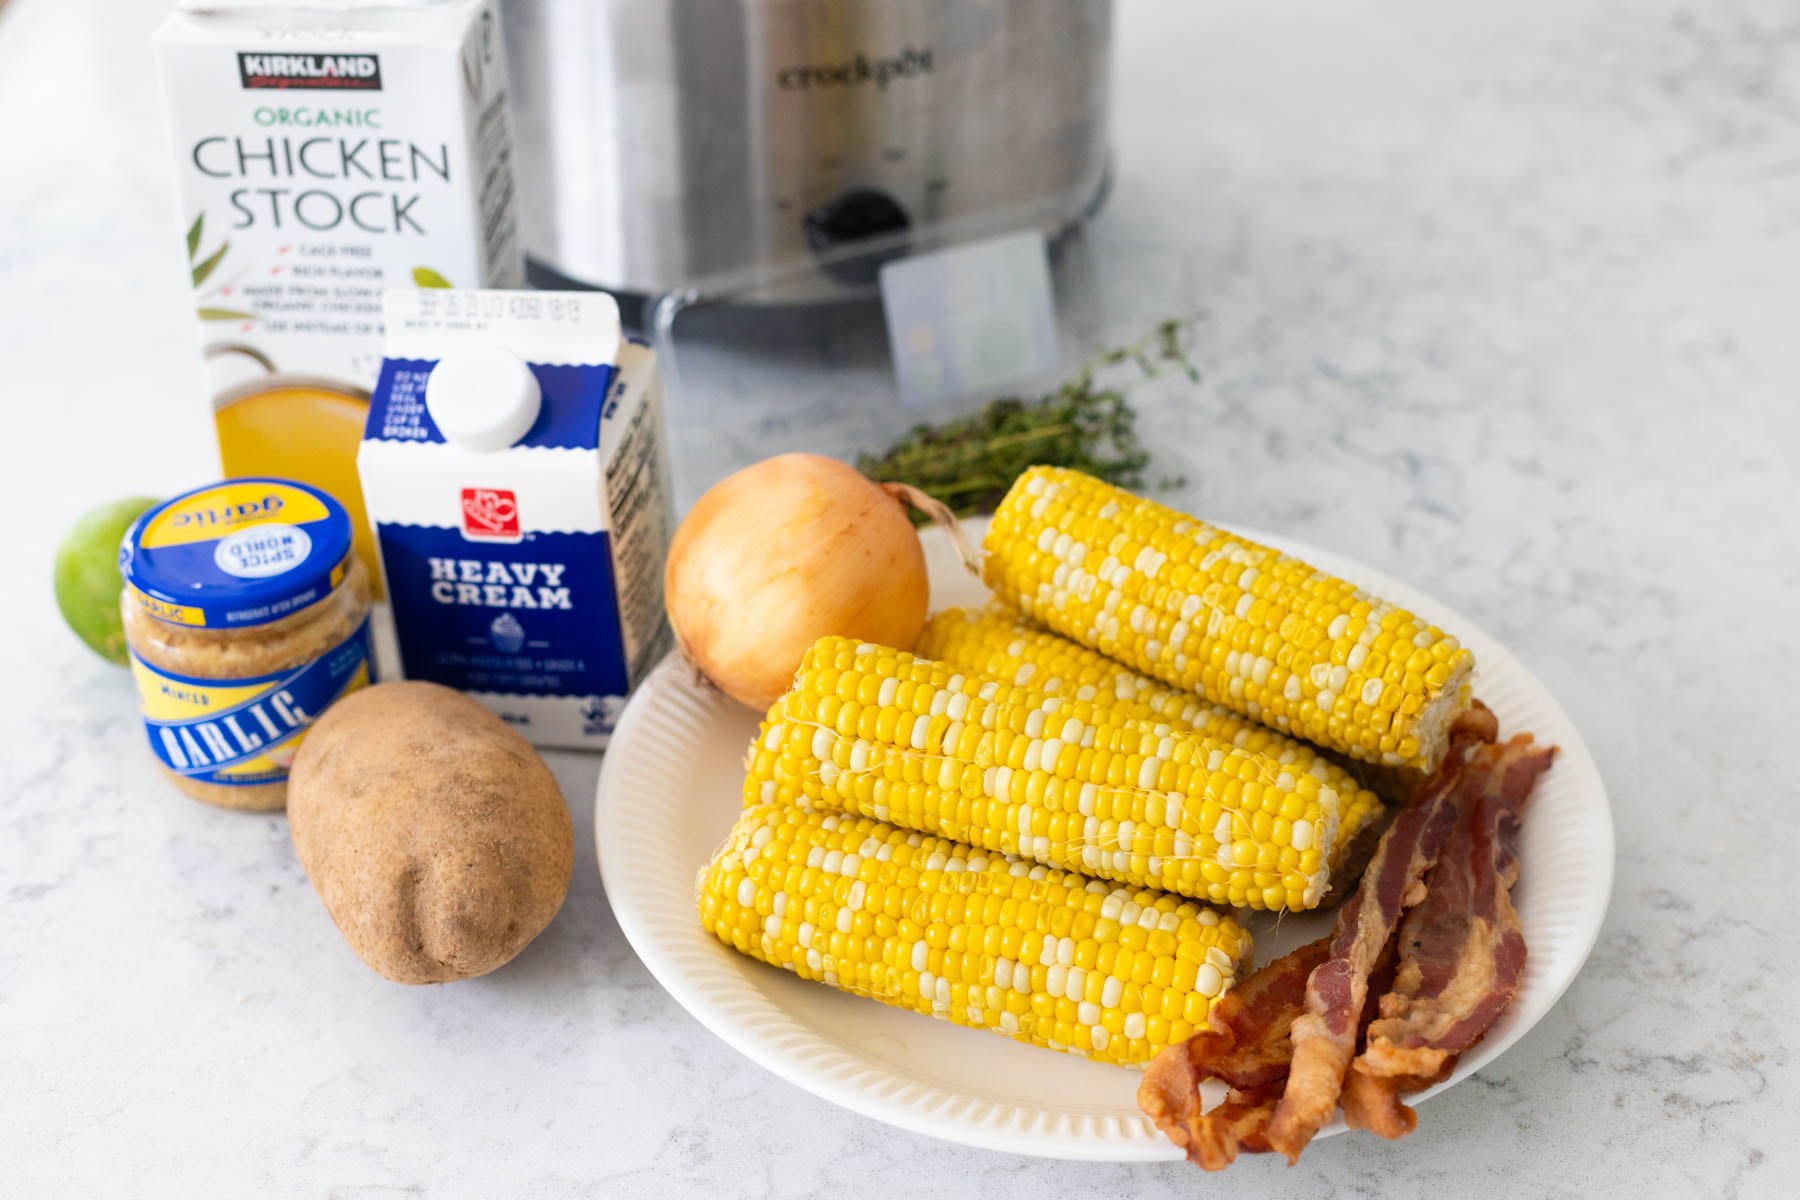 The ingredients to make the corn chowder from fresh corn on the cob are sitting on the counter in front of a Crockpot.